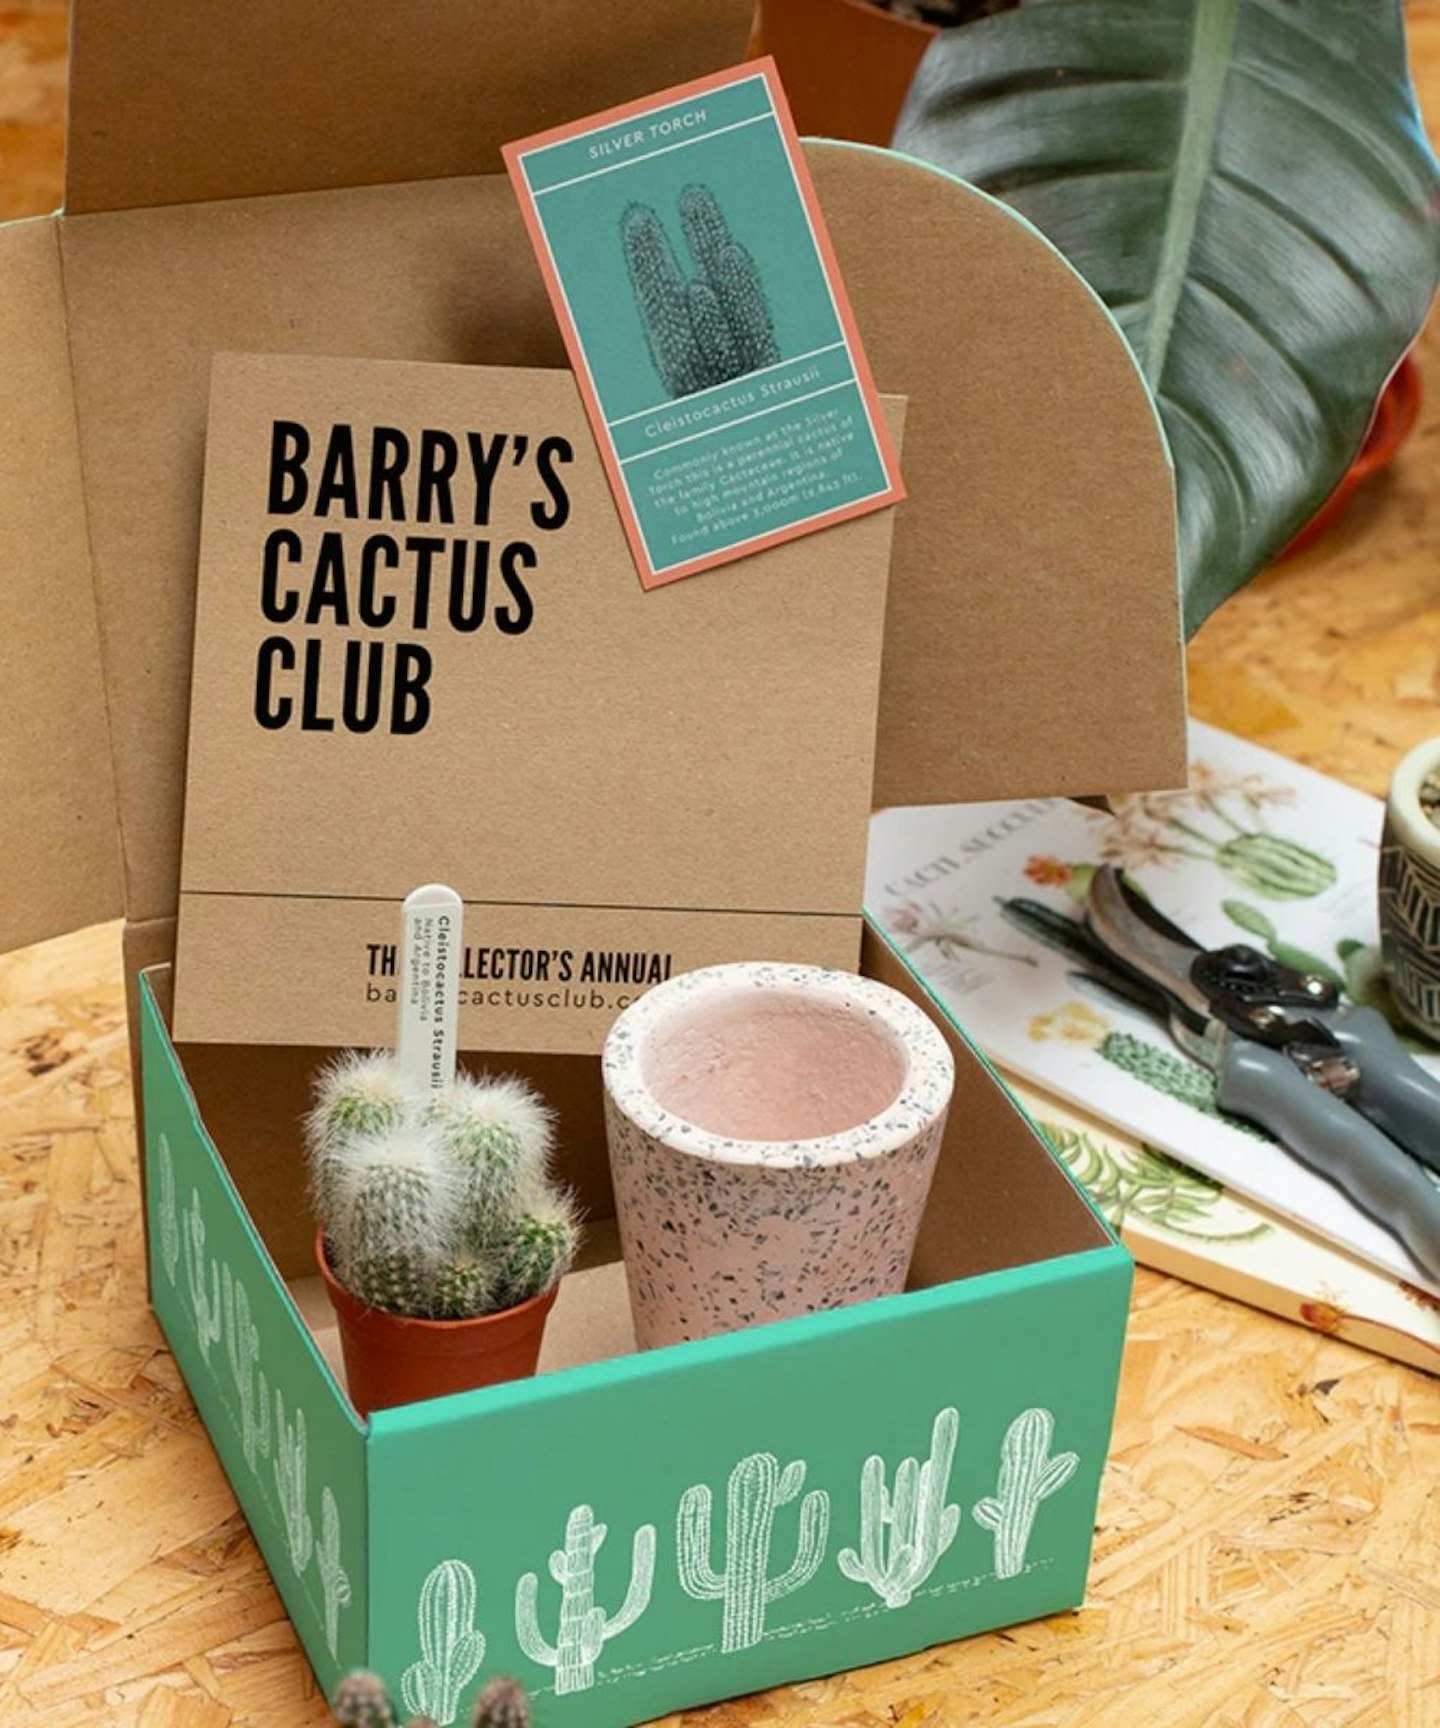 Barryu2019s Cactus Club, From £15